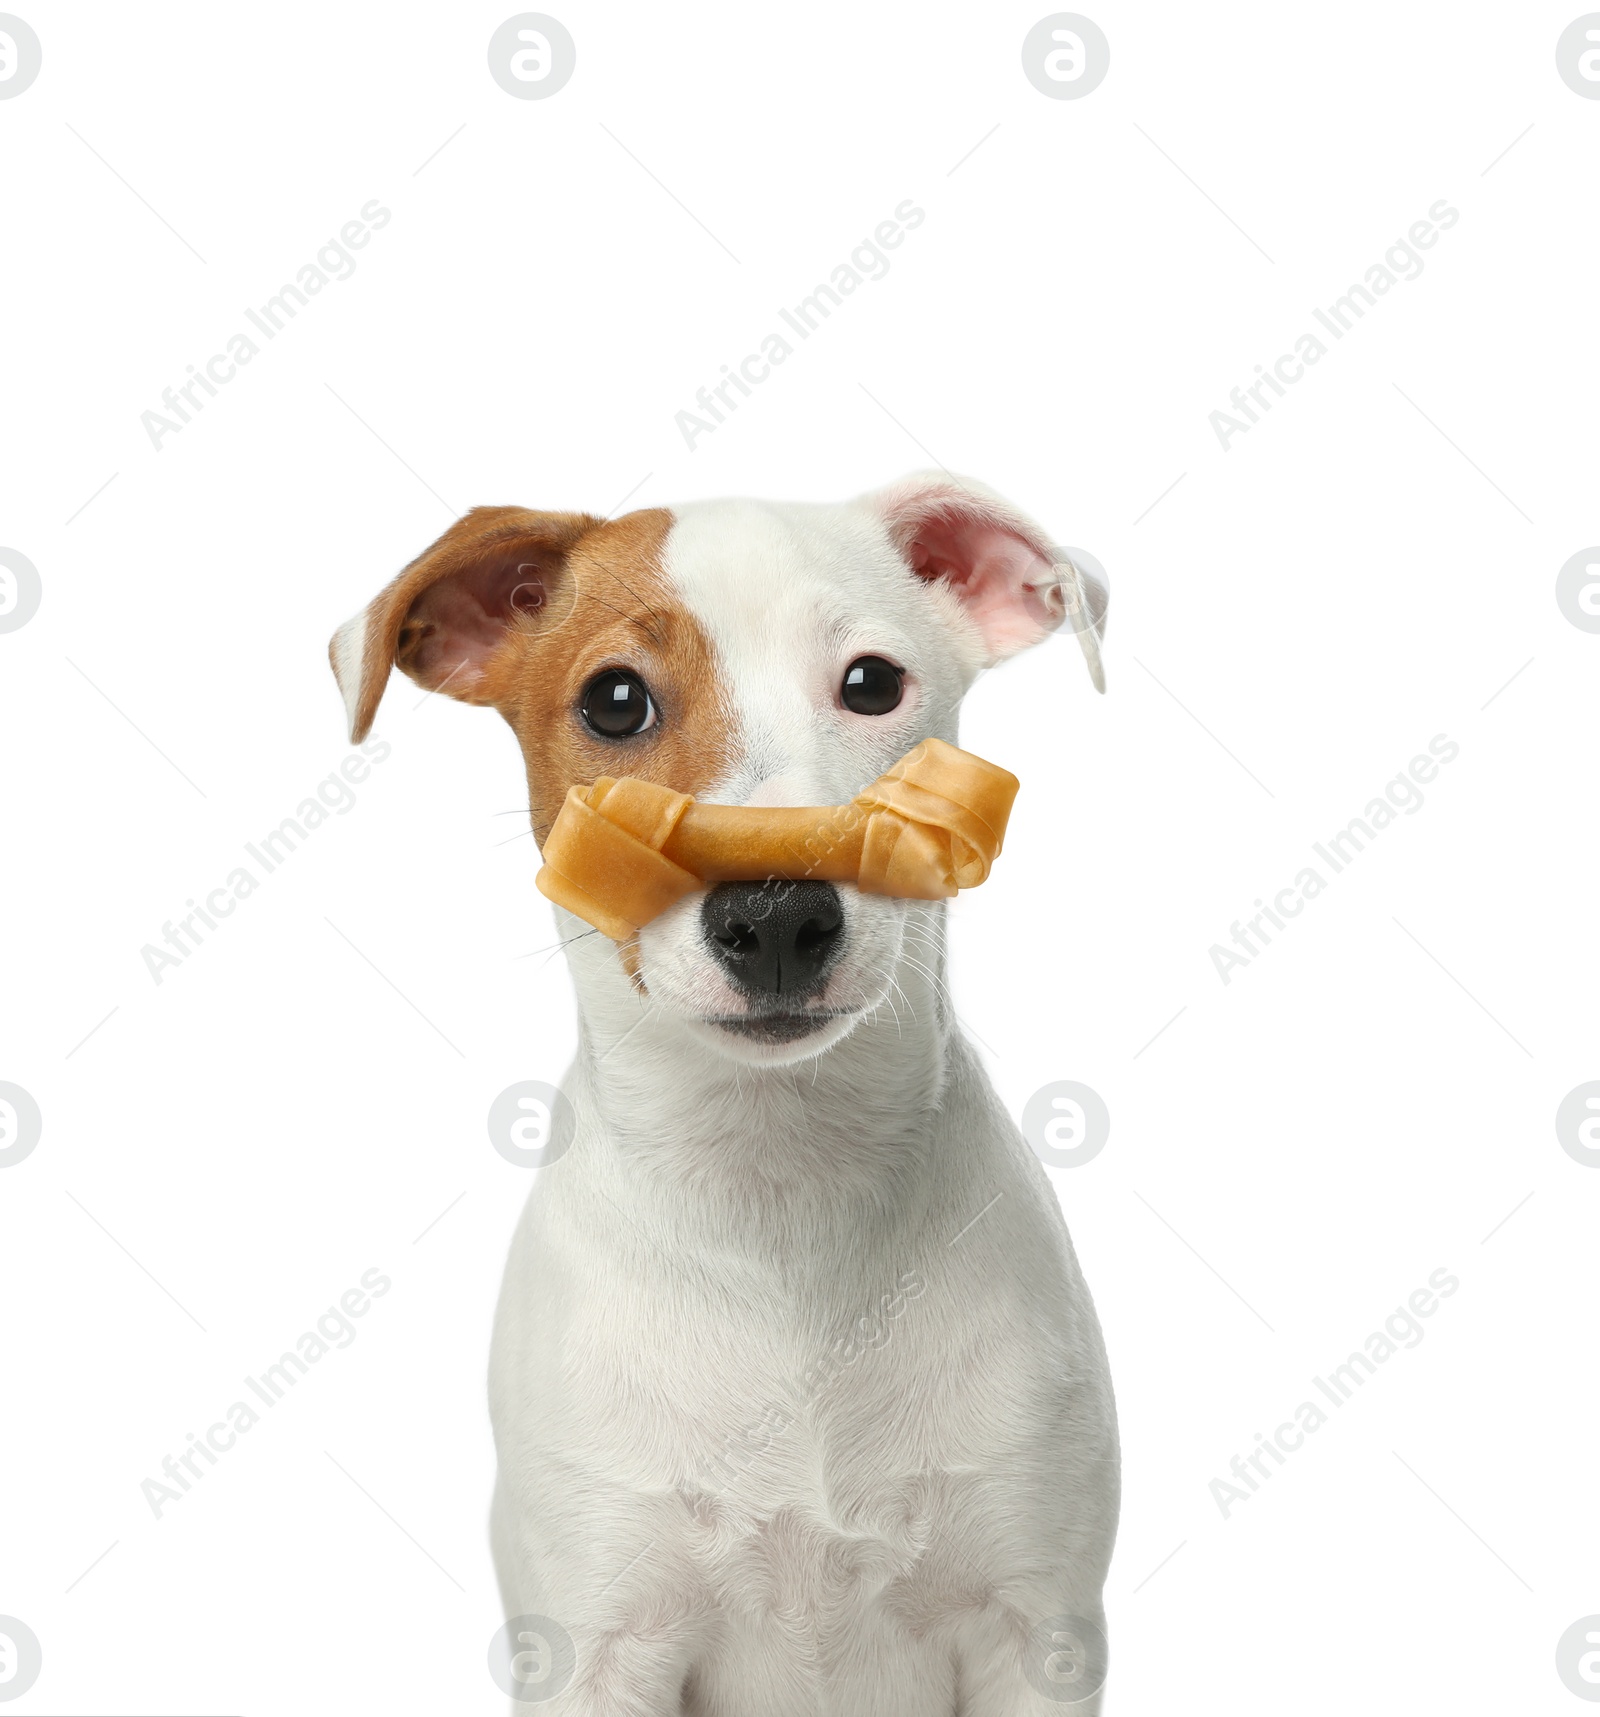 Image of Cute Jack Russell Terrier with bone dog treat on nose against white background